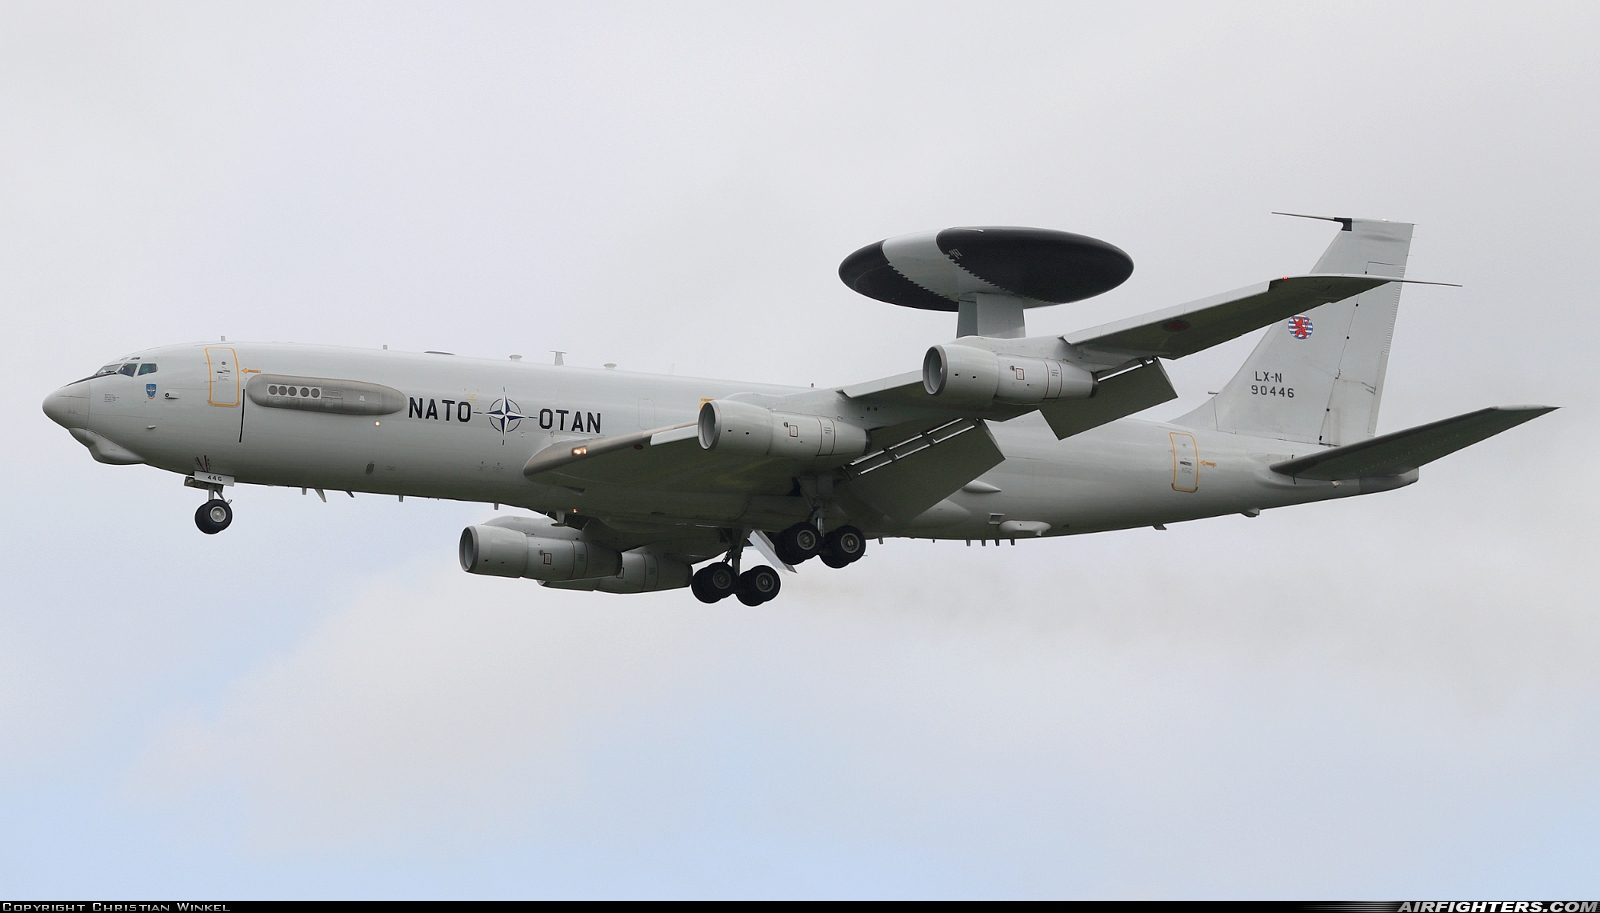 Luxembourg - NATO Boeing E-3A Sentry (707-300) LX-N90446 at Wunstorf (ETNW), Germany